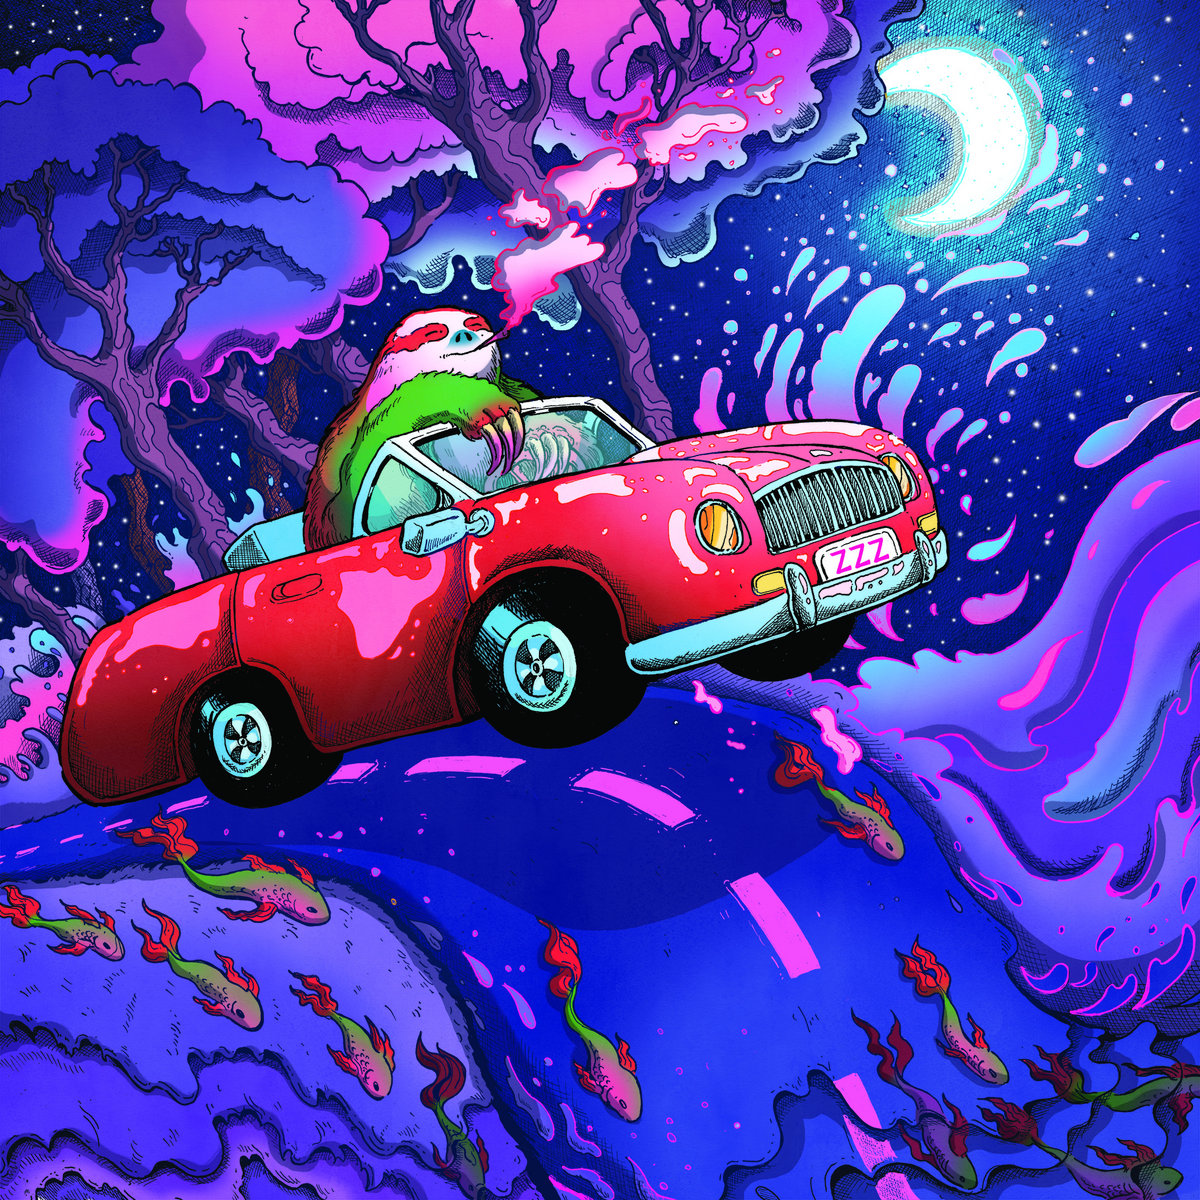 holland patent public library songs to fall asleep to album art - cartoon illustration of a sloth driving a car at night